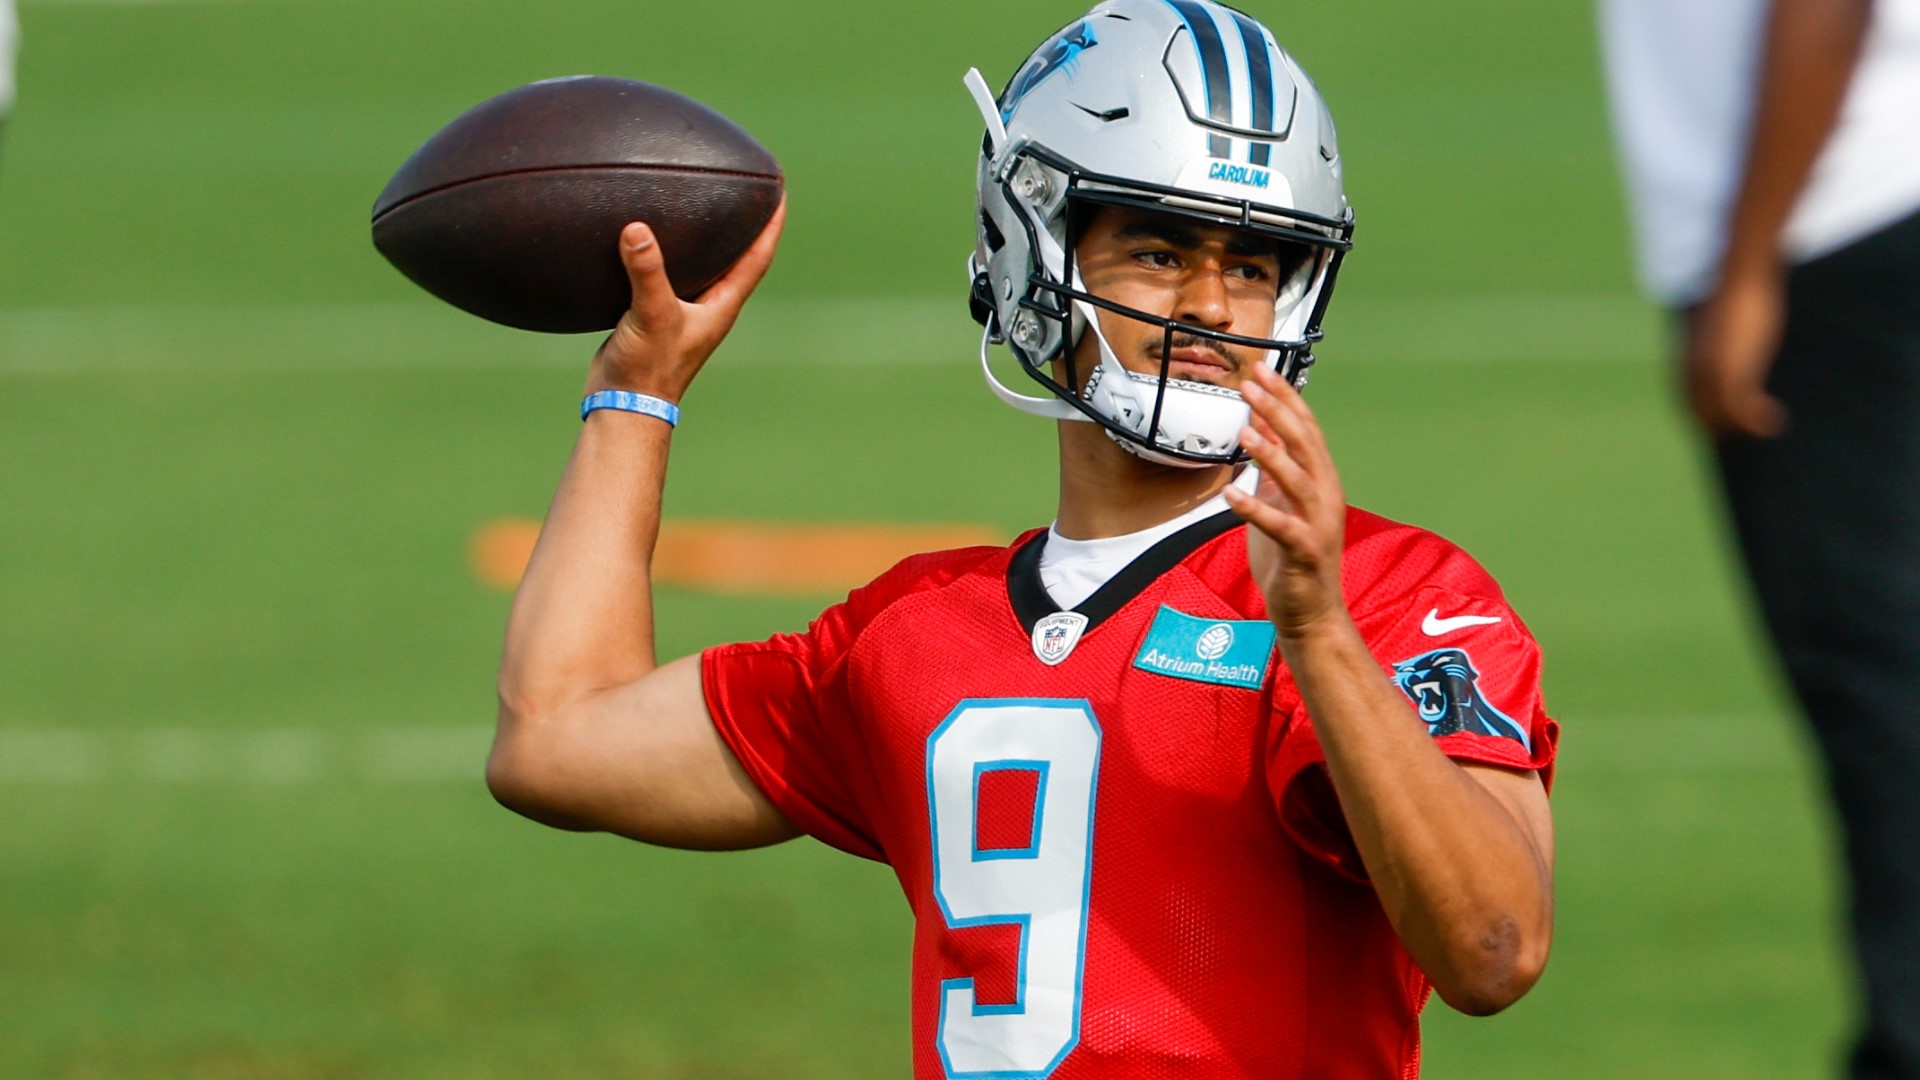 No. 1 overall draft pick Bryce Young discusses his first day of OTAs and leading the Panthers offense in practice.